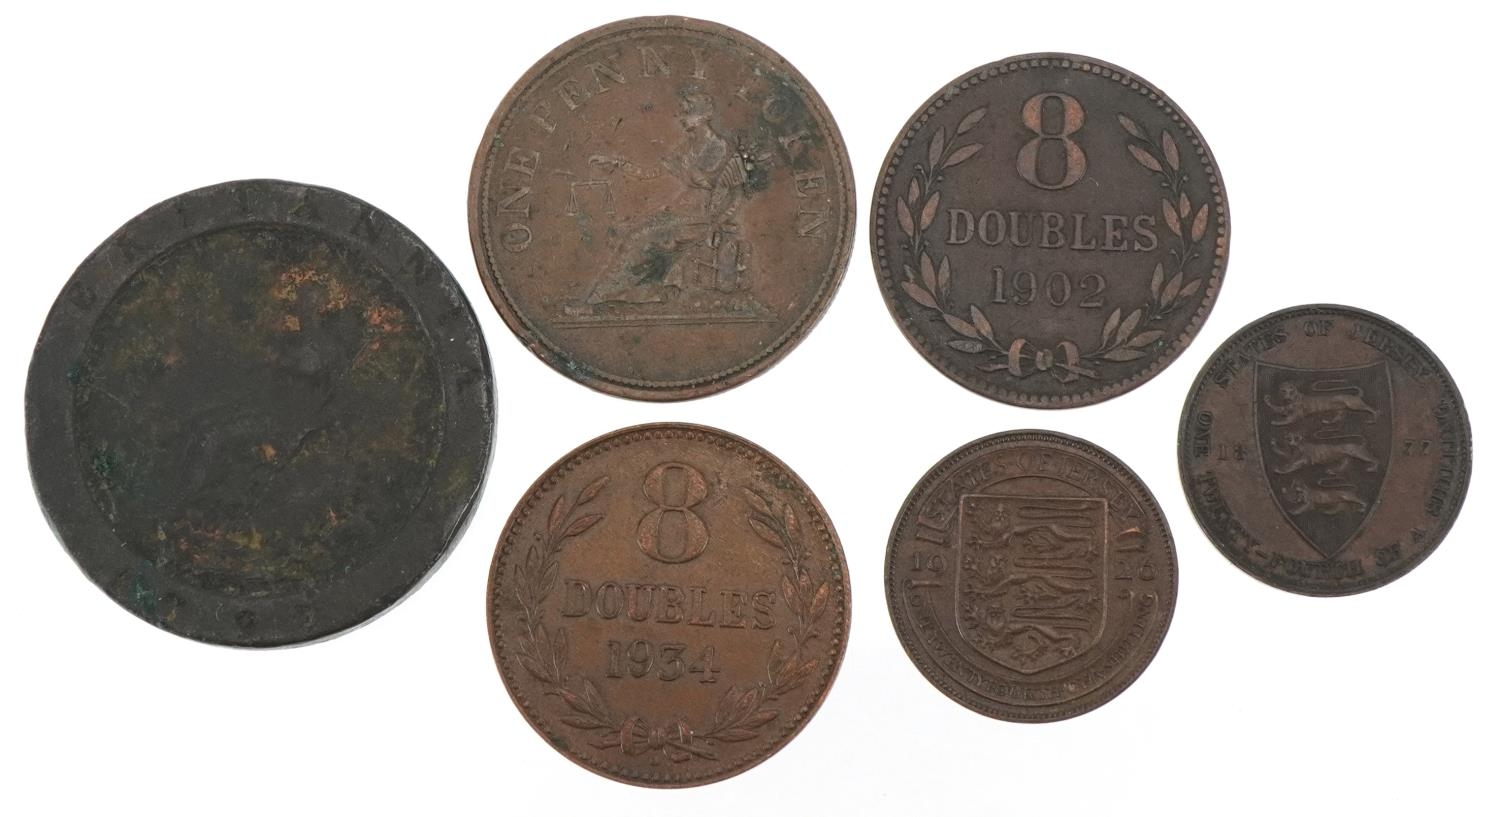 Copper coinage including George III 1797 two pence - Image 4 of 6